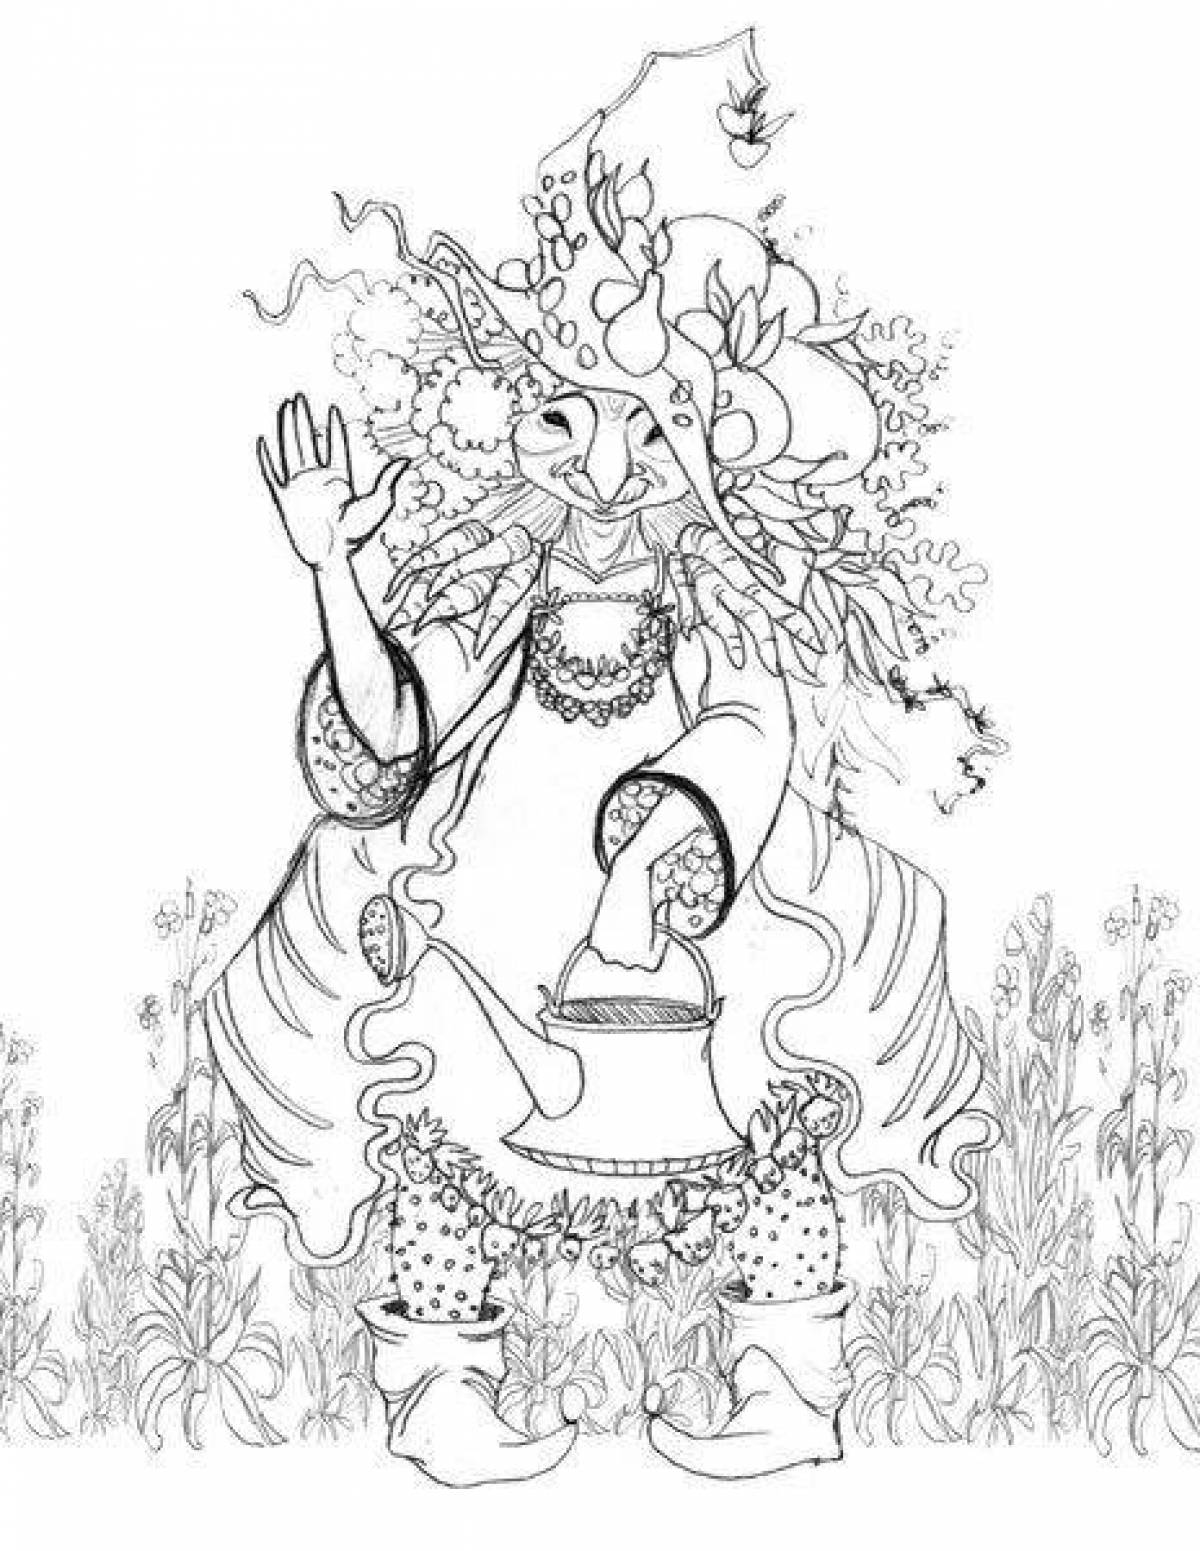 Fabulous coloring book based on Bazhov's fairy tales